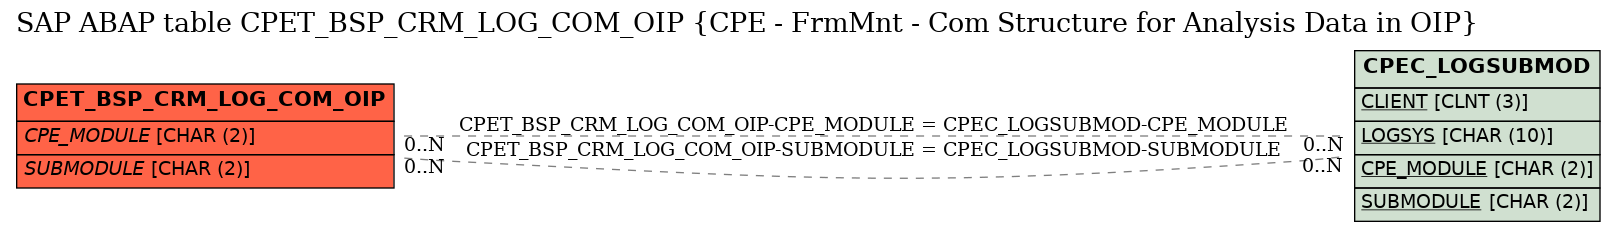 E-R Diagram for table CPET_BSP_CRM_LOG_COM_OIP (CPE - FrmMnt - Com Structure for Analysis Data in OIP)